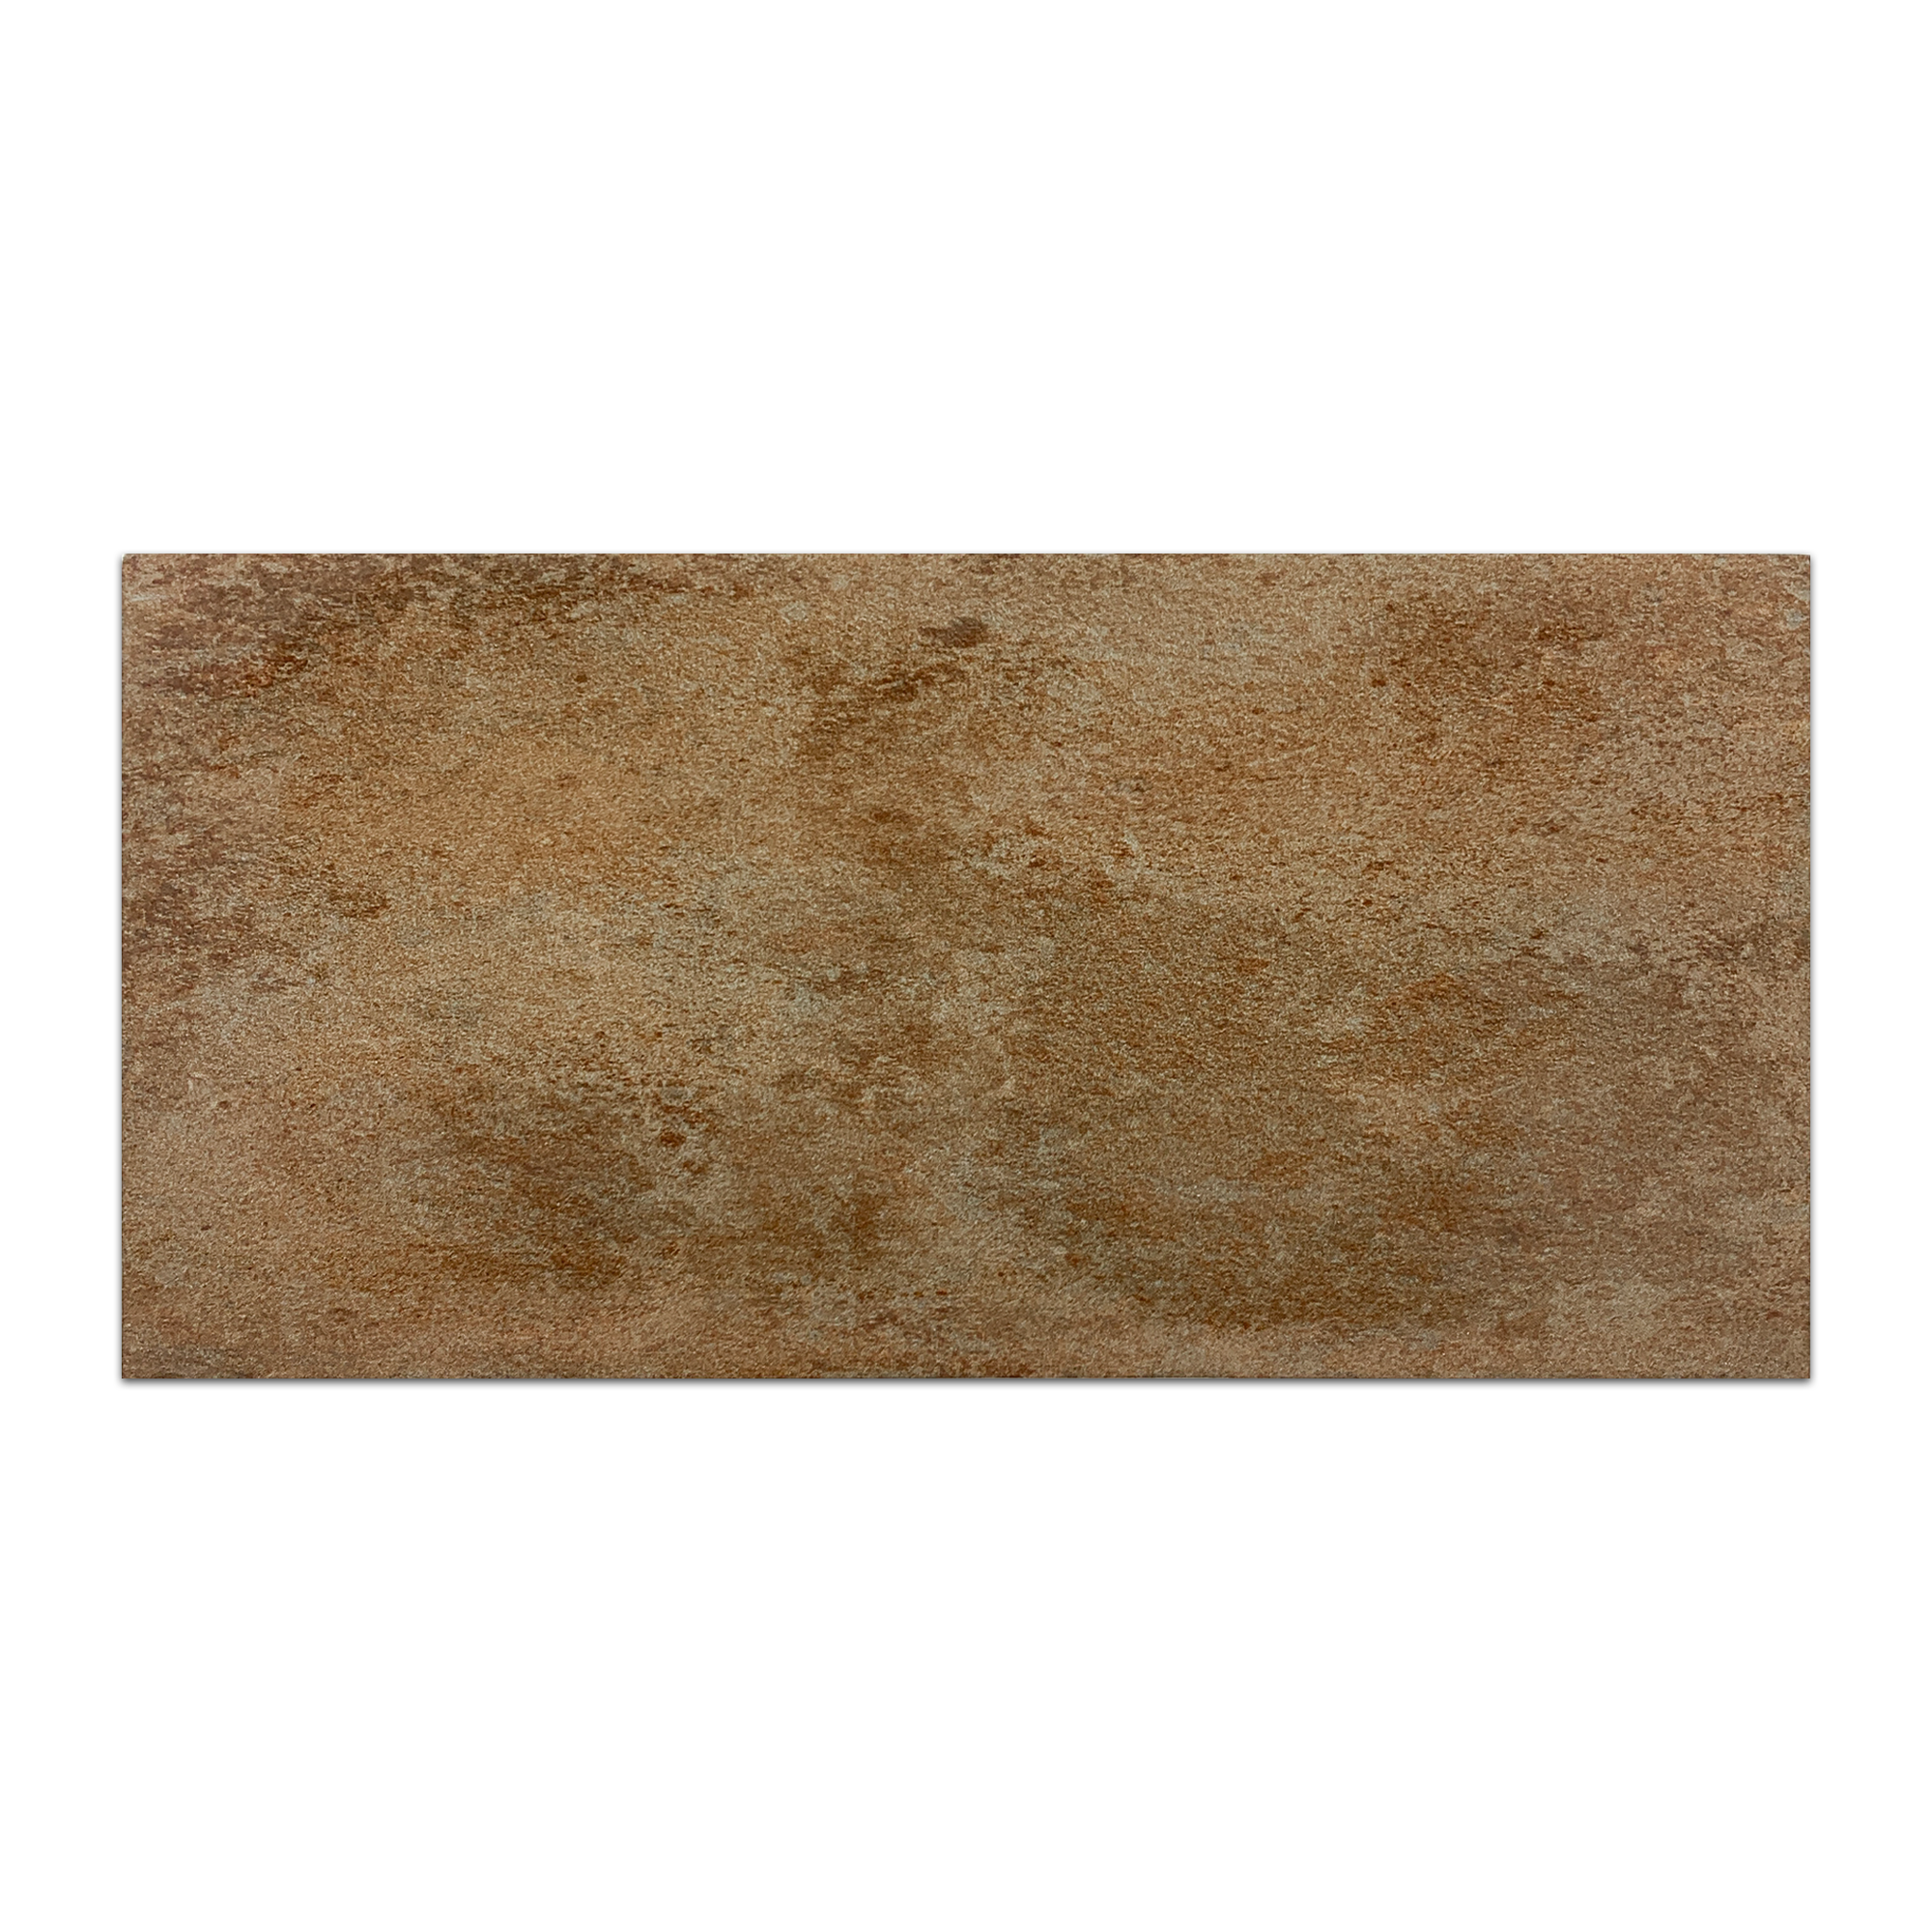 Elon Boston Brick South Porcelain Rectangle Field Tile, 8.8x17.7 inches, Natural Pressed Finish, BC131 - Surface Group International.